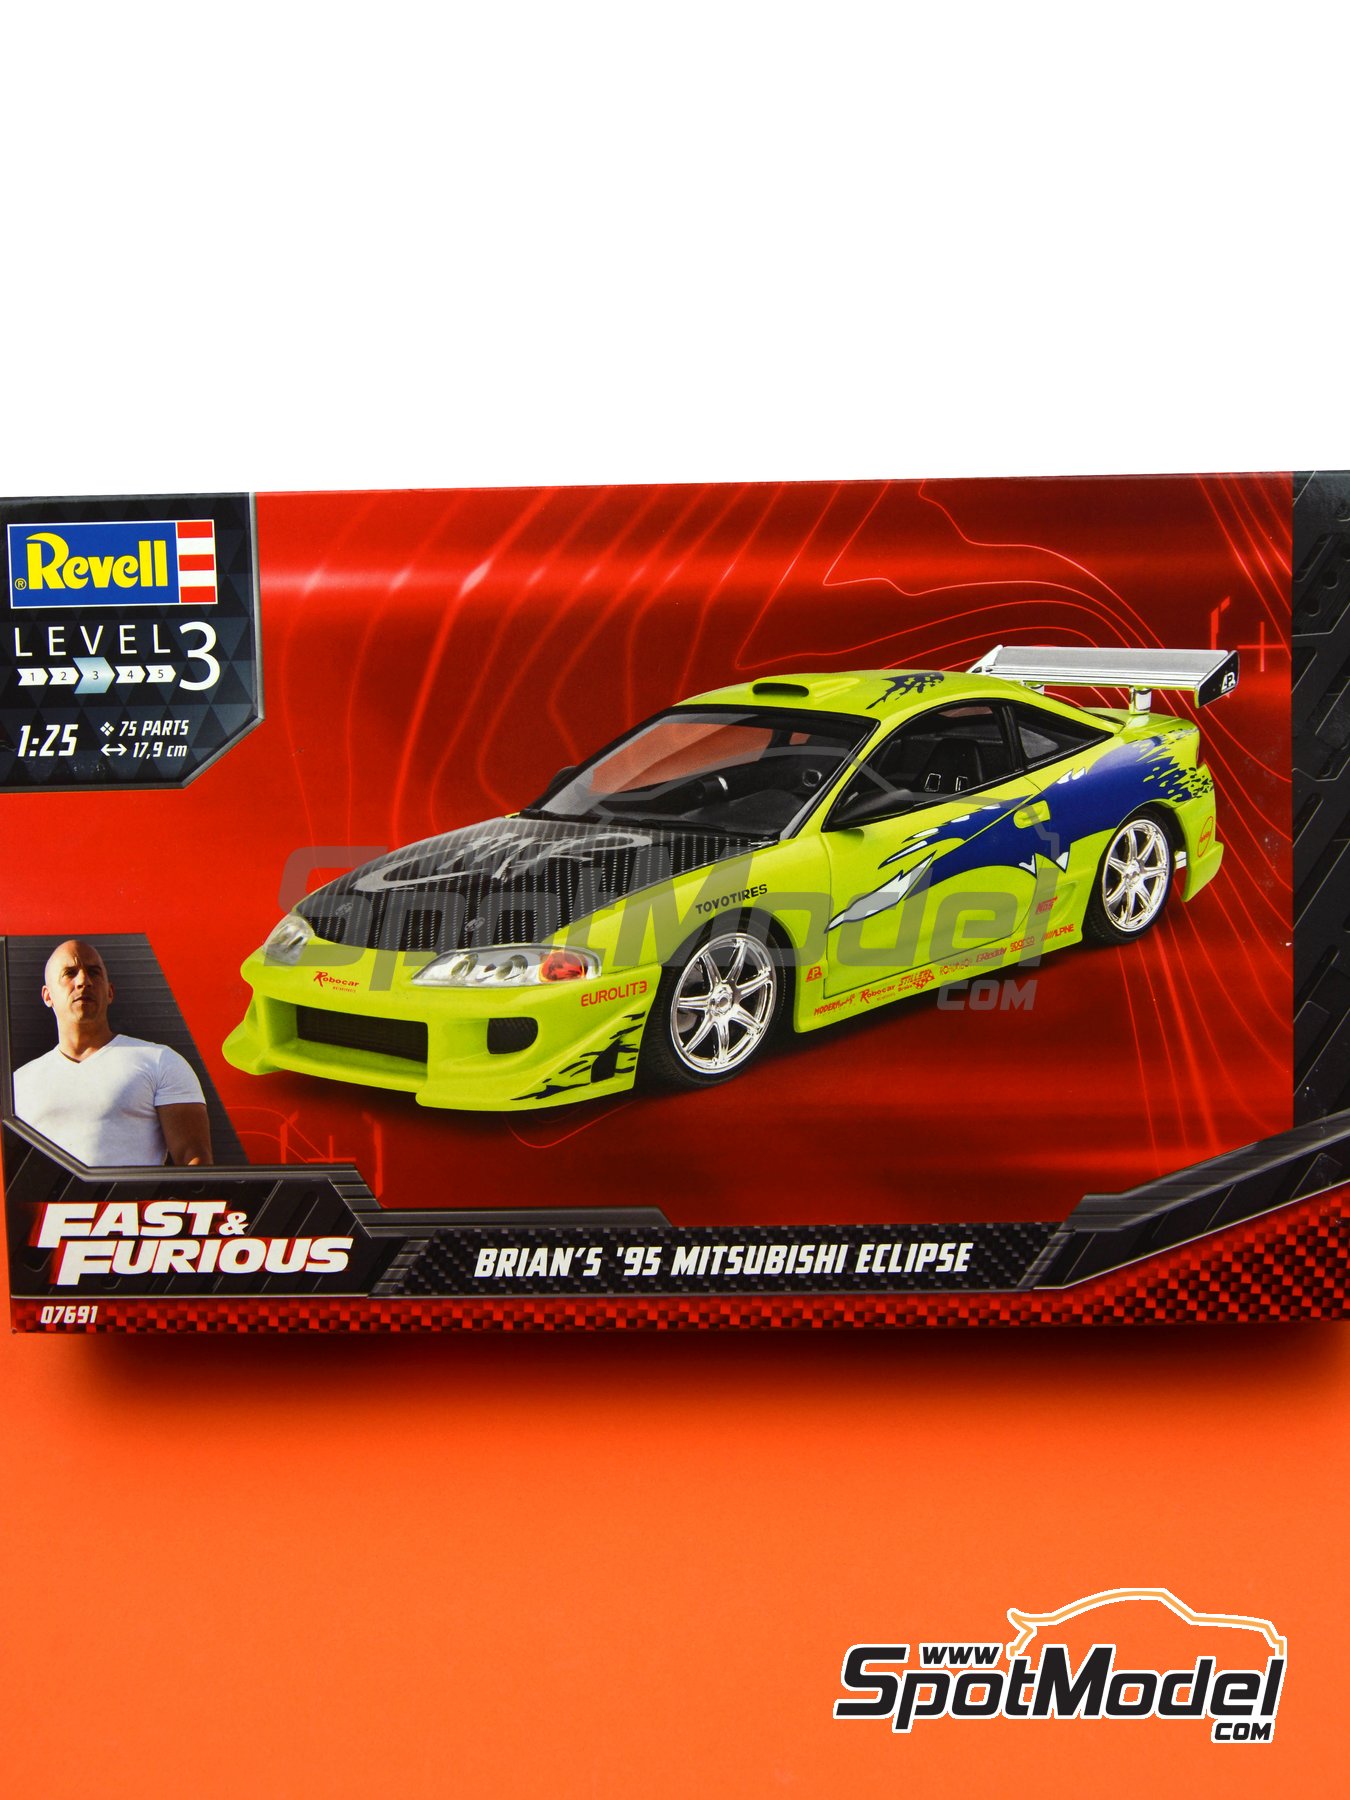 Maquette voiture Revell 1/24 07692 Fast&Furious